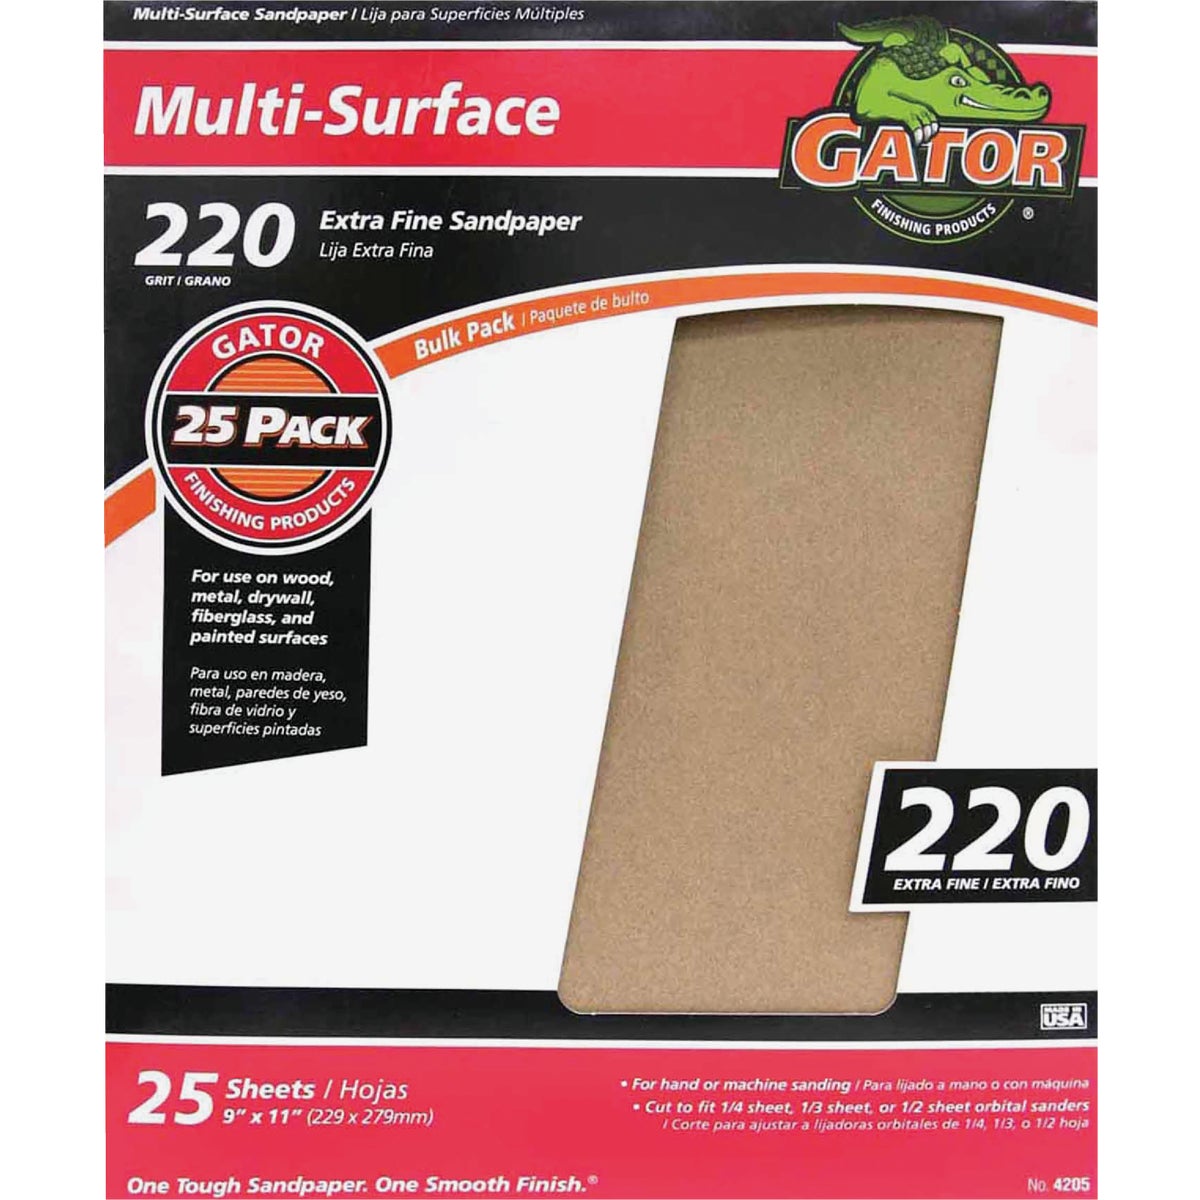 Item 339539, For use on wood, metal, plastic, and painted surfaces.